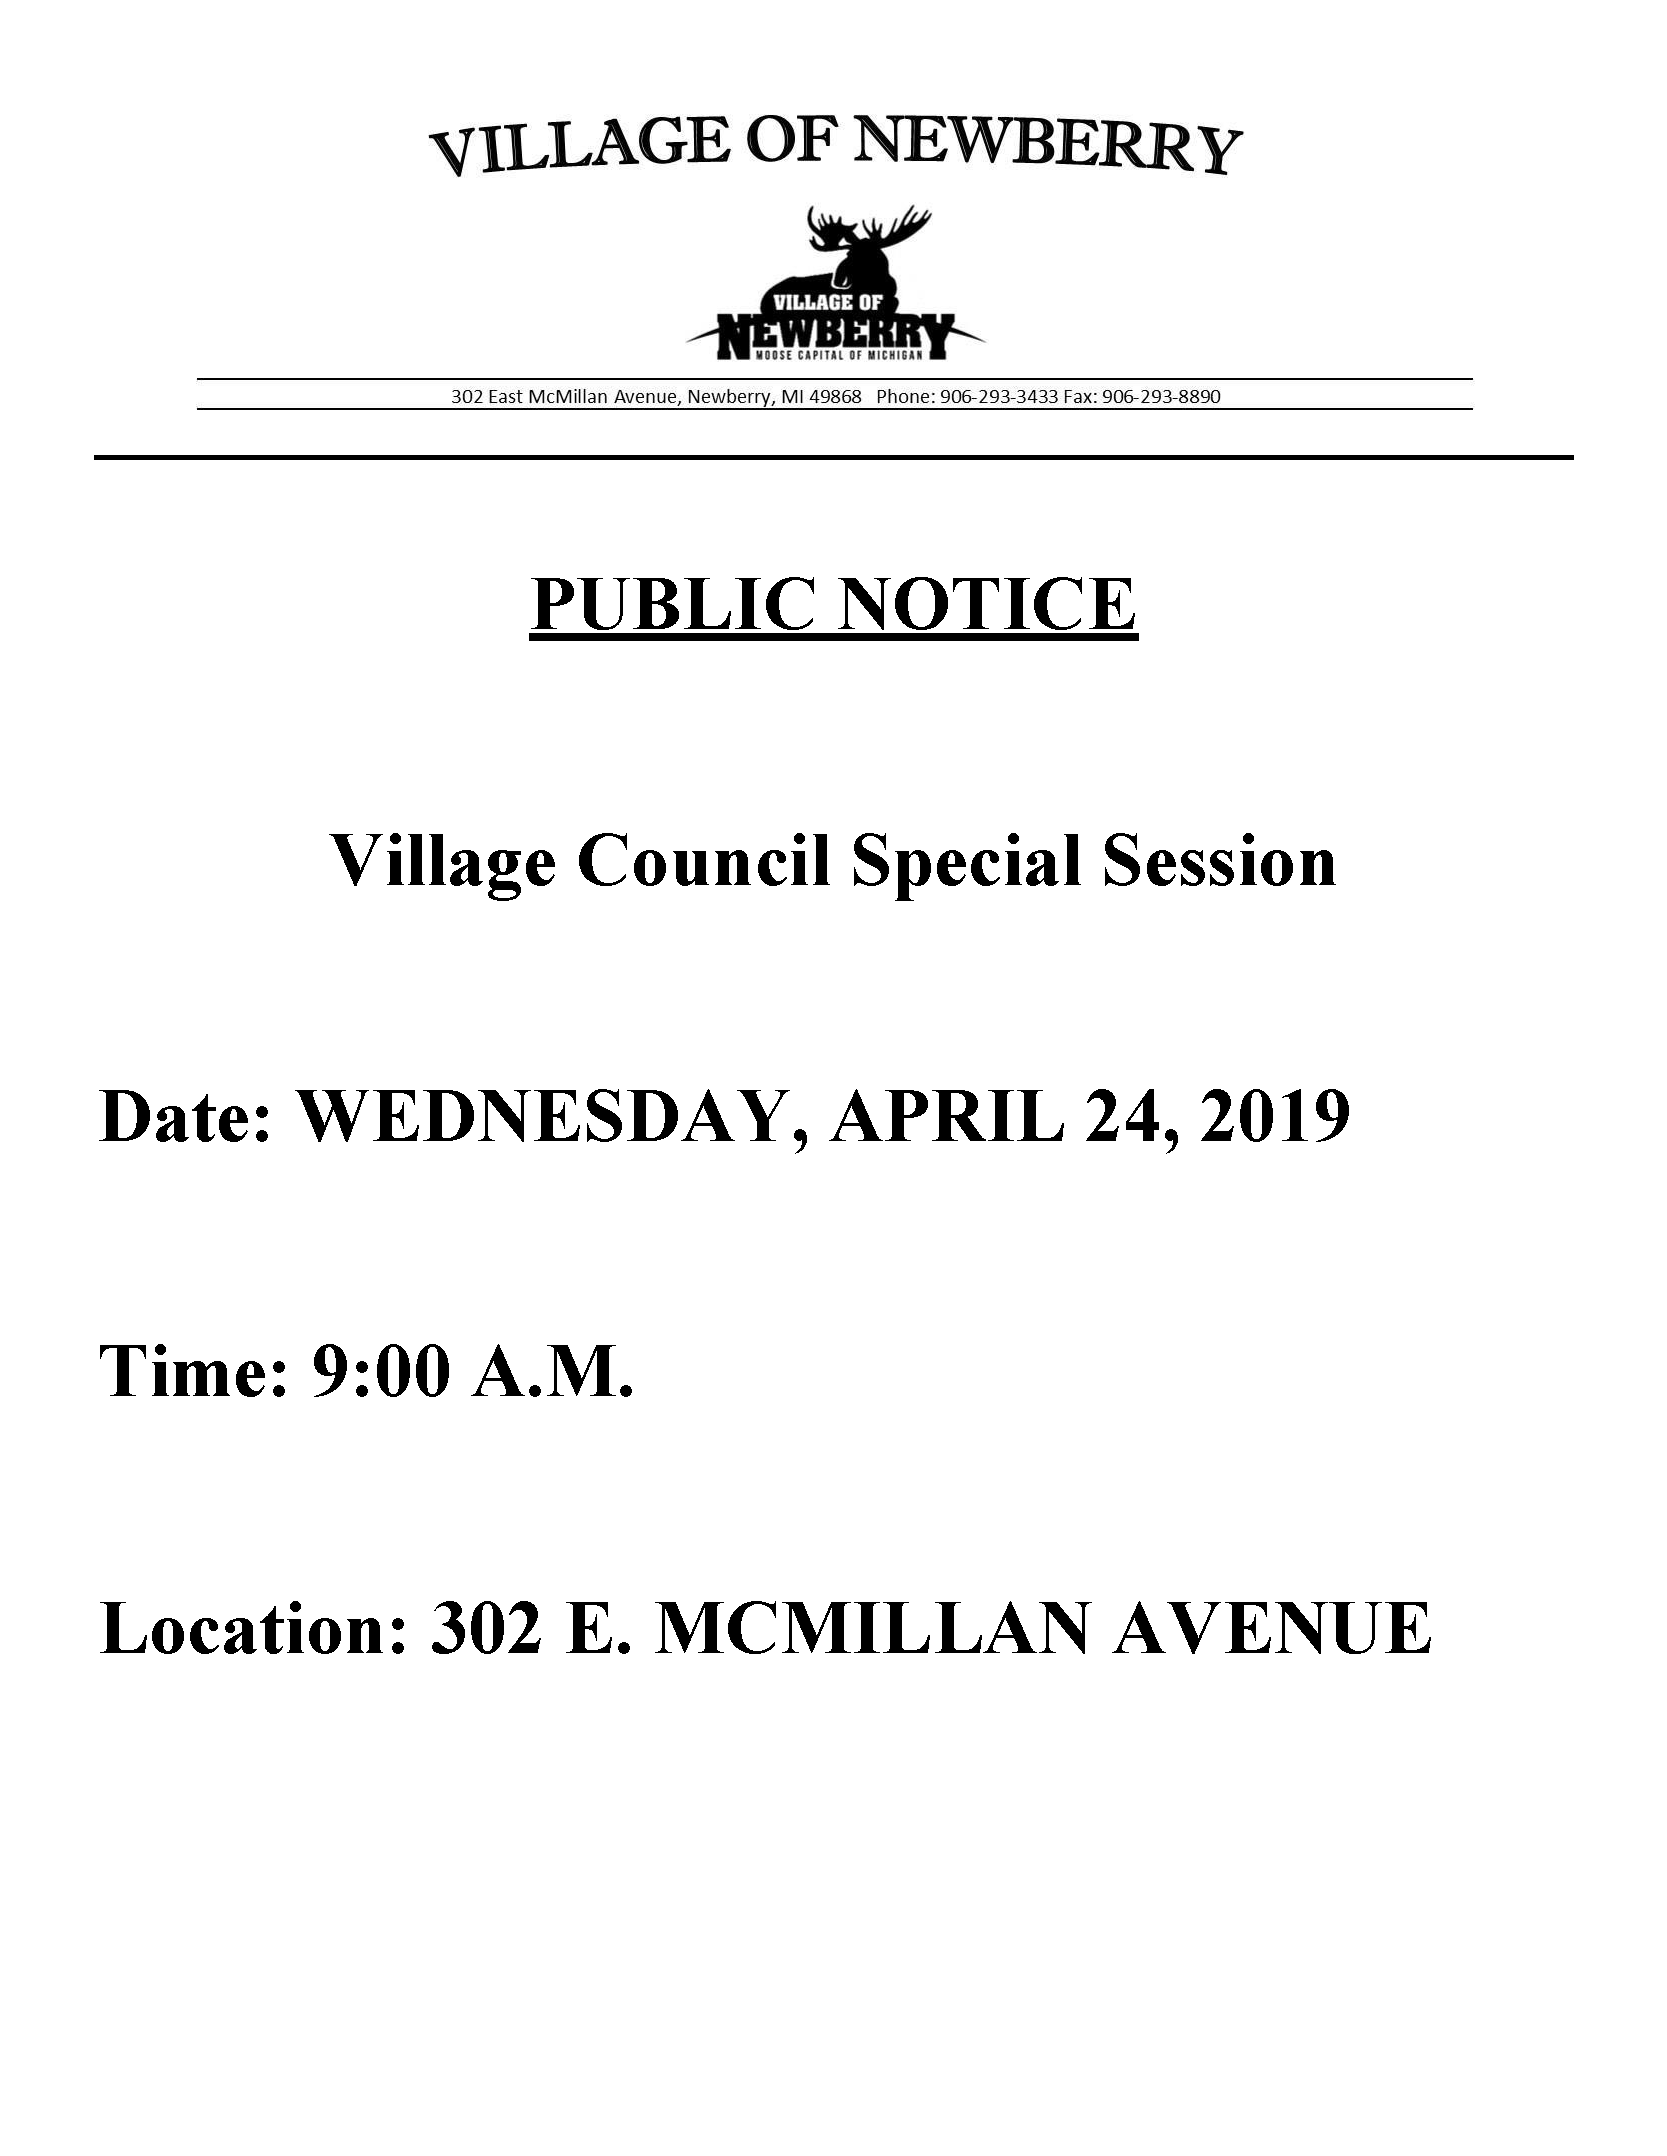 Special_Session_Meeting_Notice_4.24